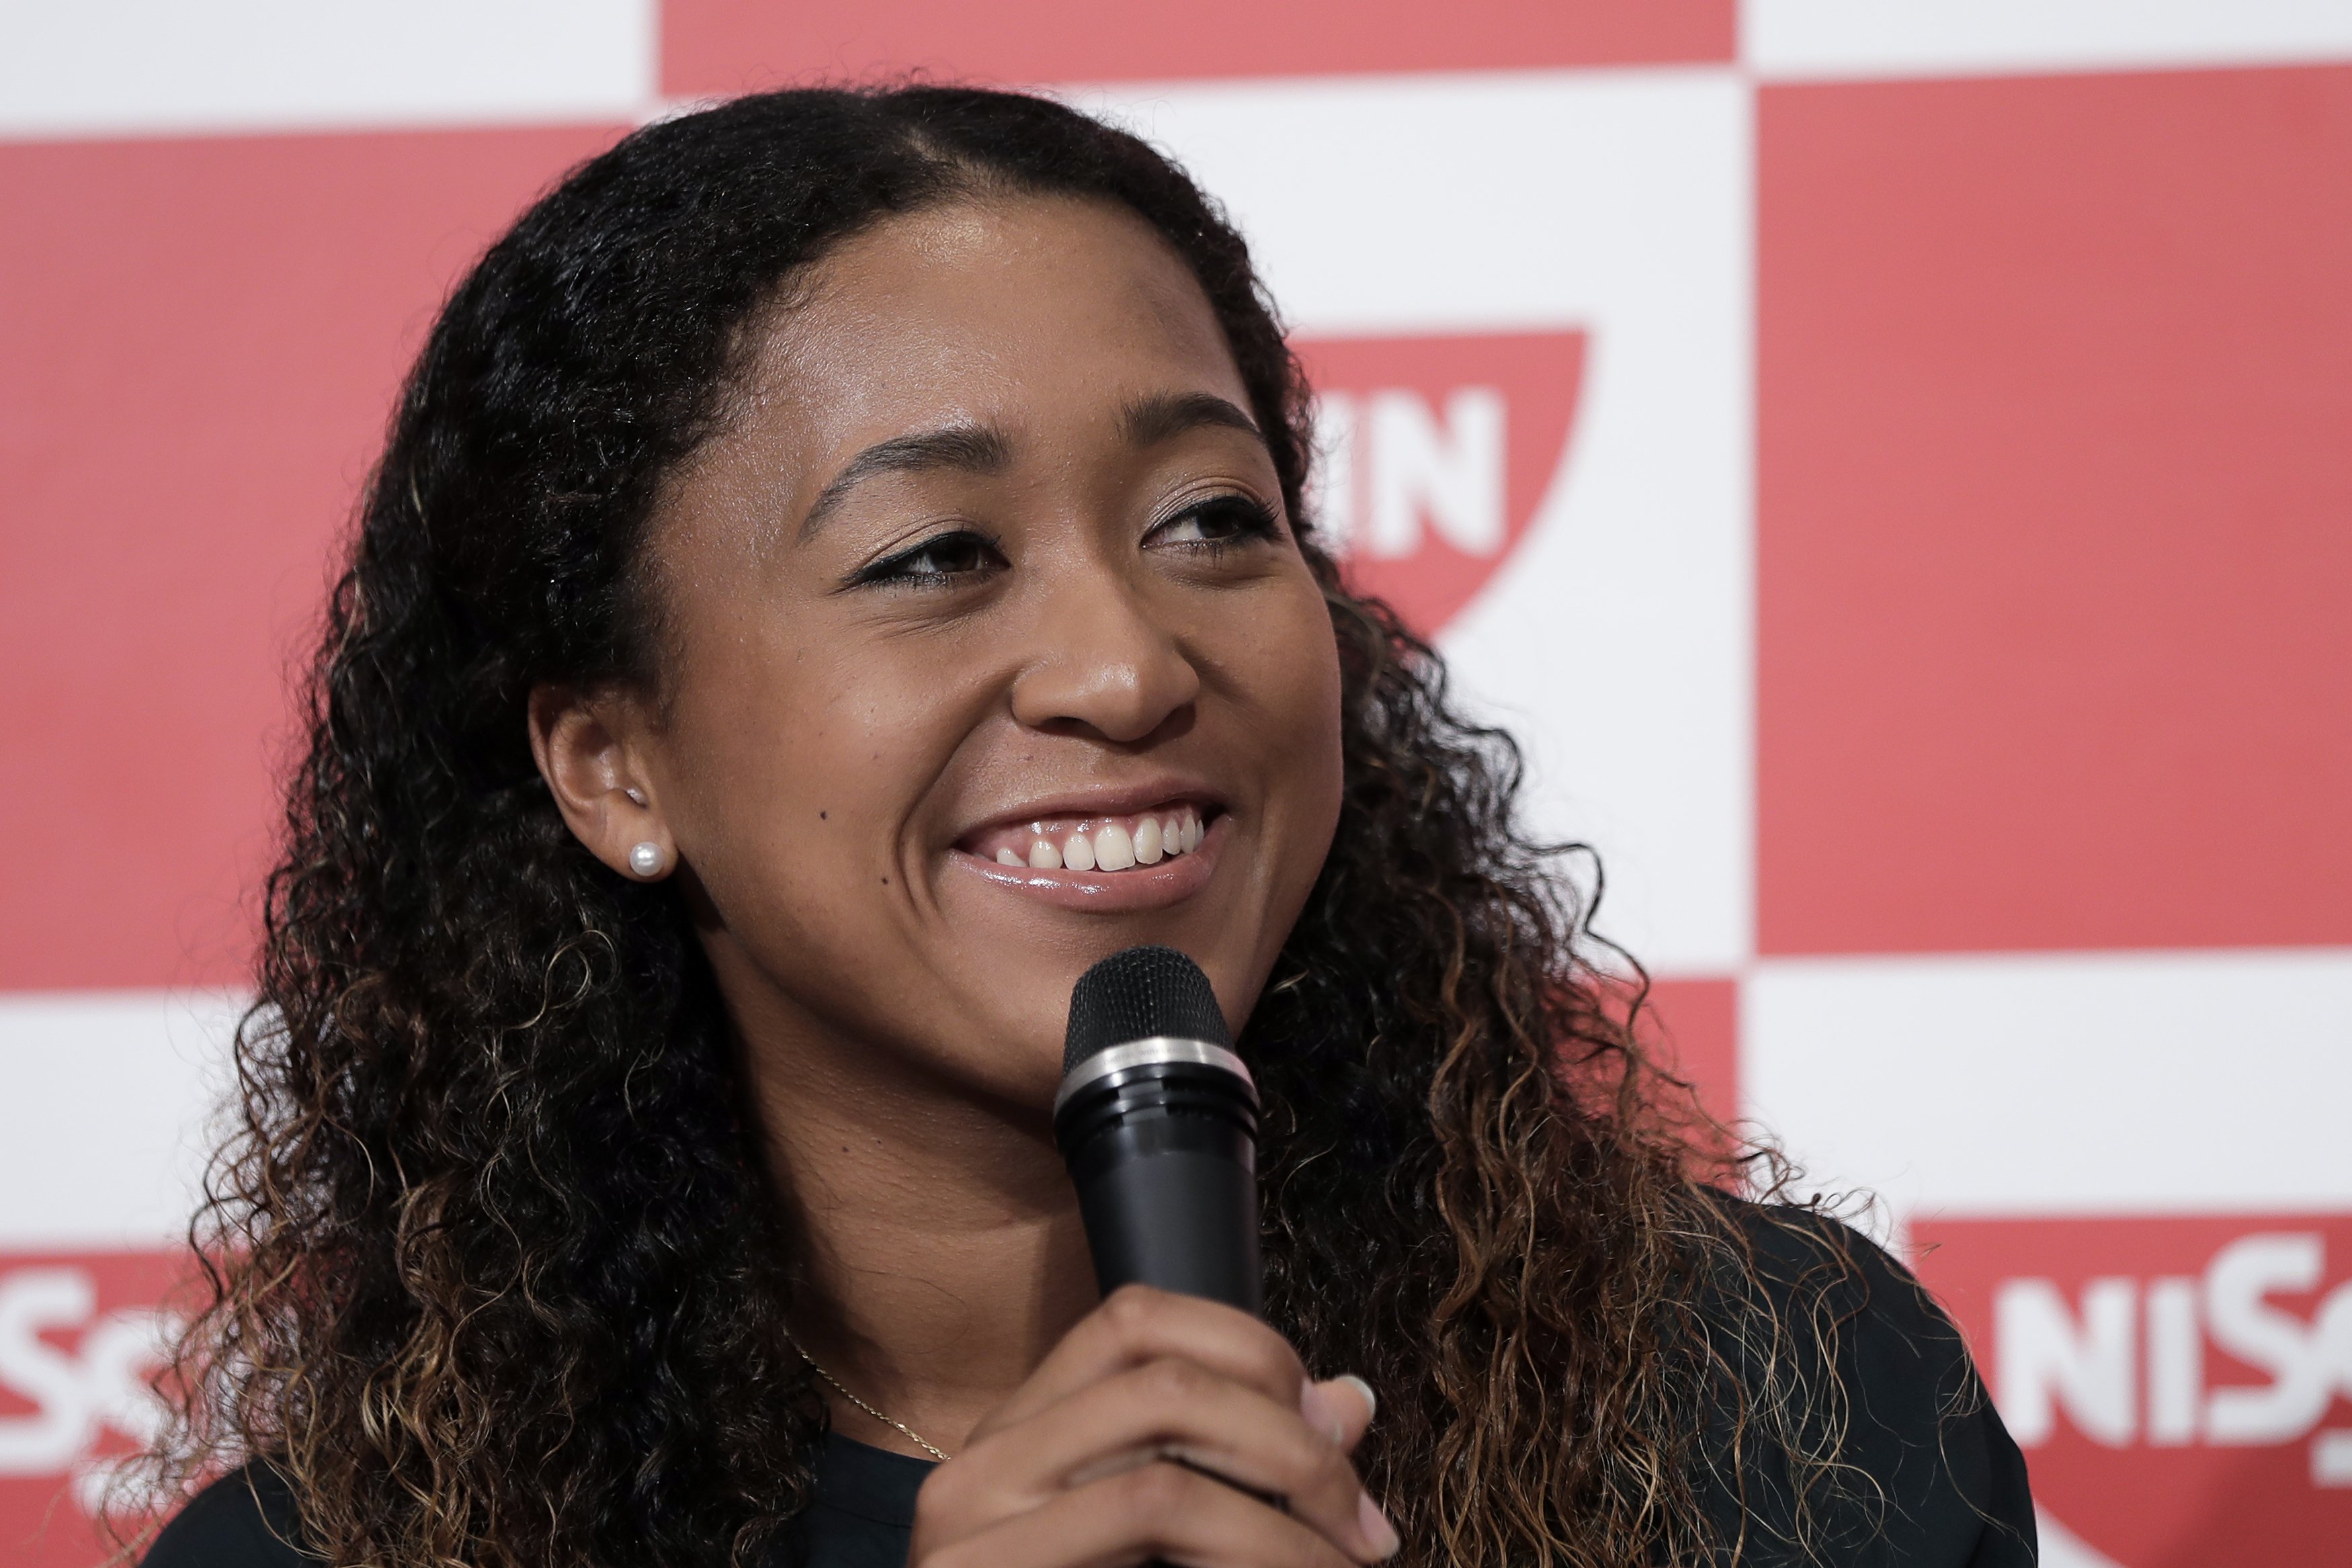 Naomi Osaka during a press conference in Japan in 2018. | Photo: Getty Images